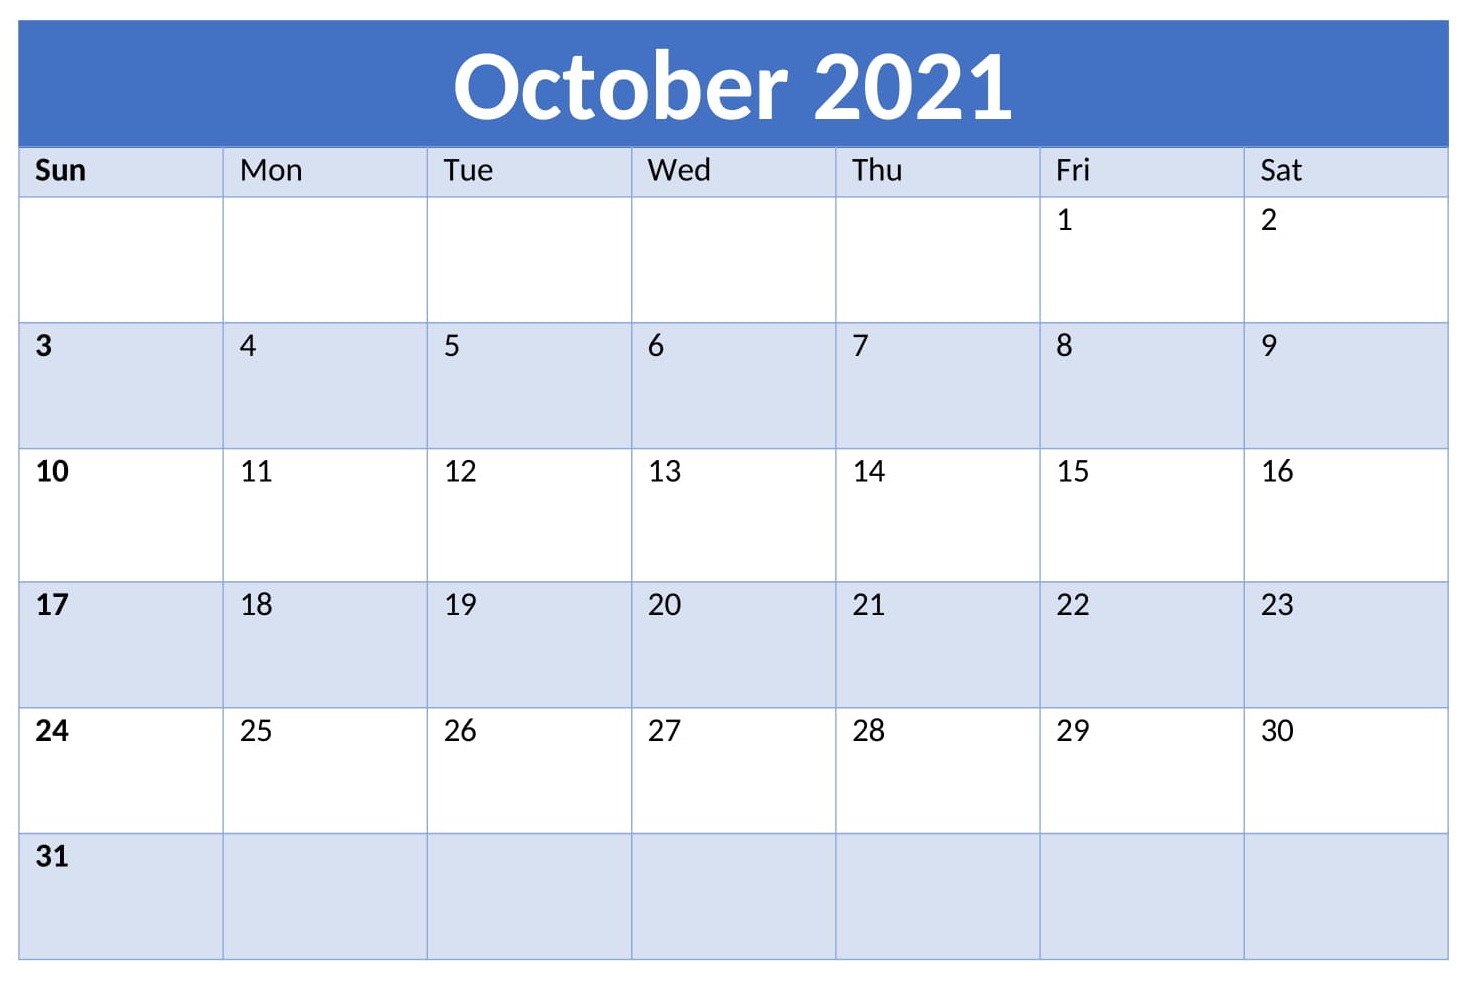 October 2021 Calendar Printable For Students